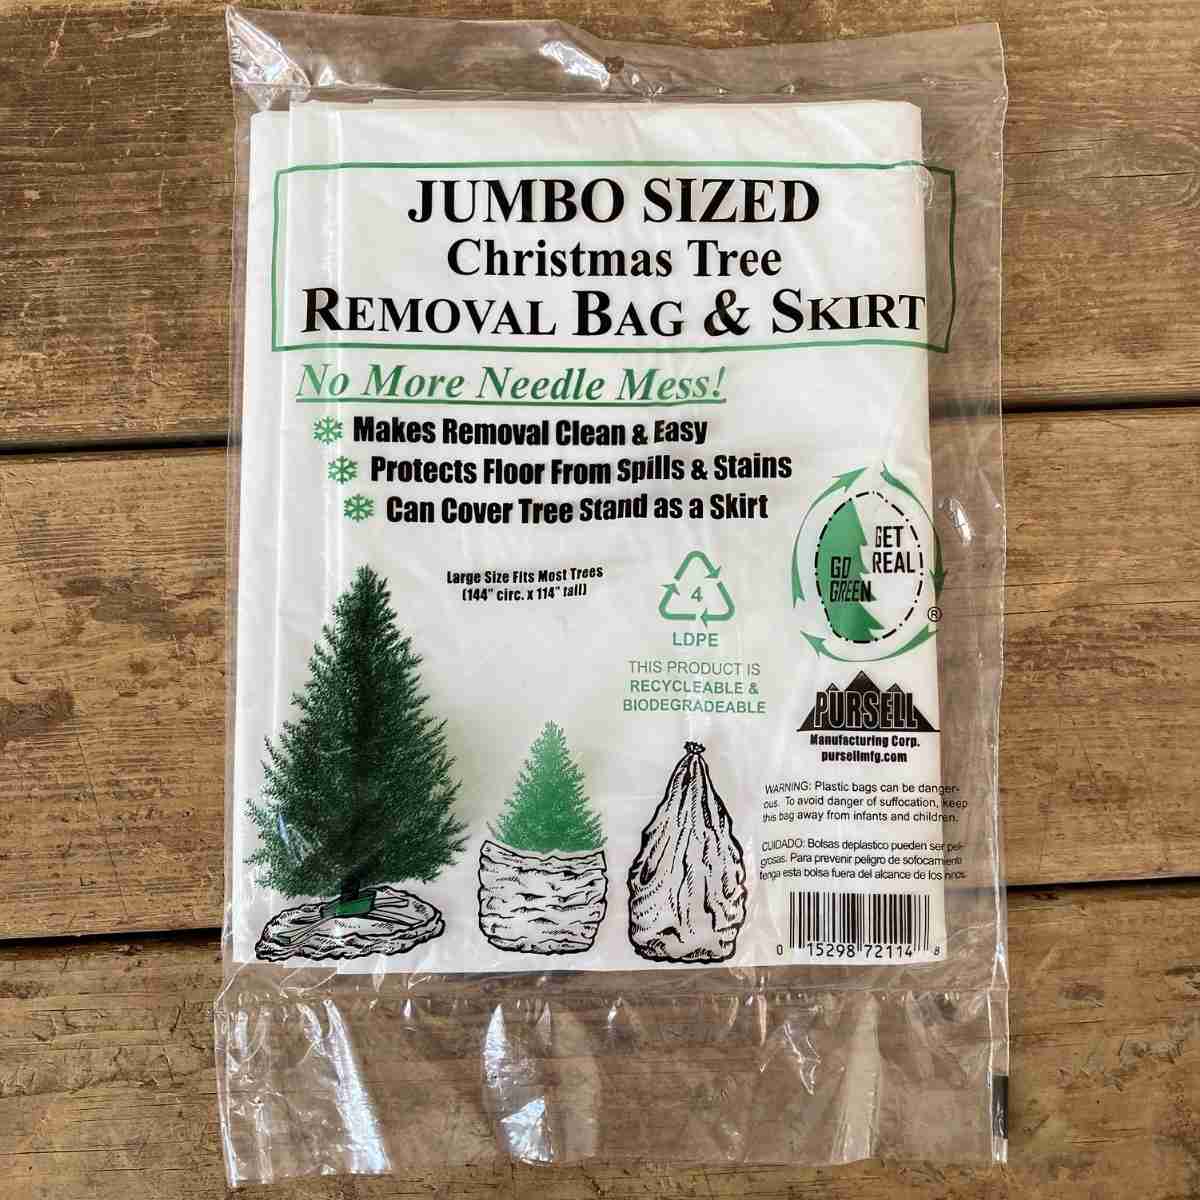  Pursell Manufacturing Christmas Tree Disposal and